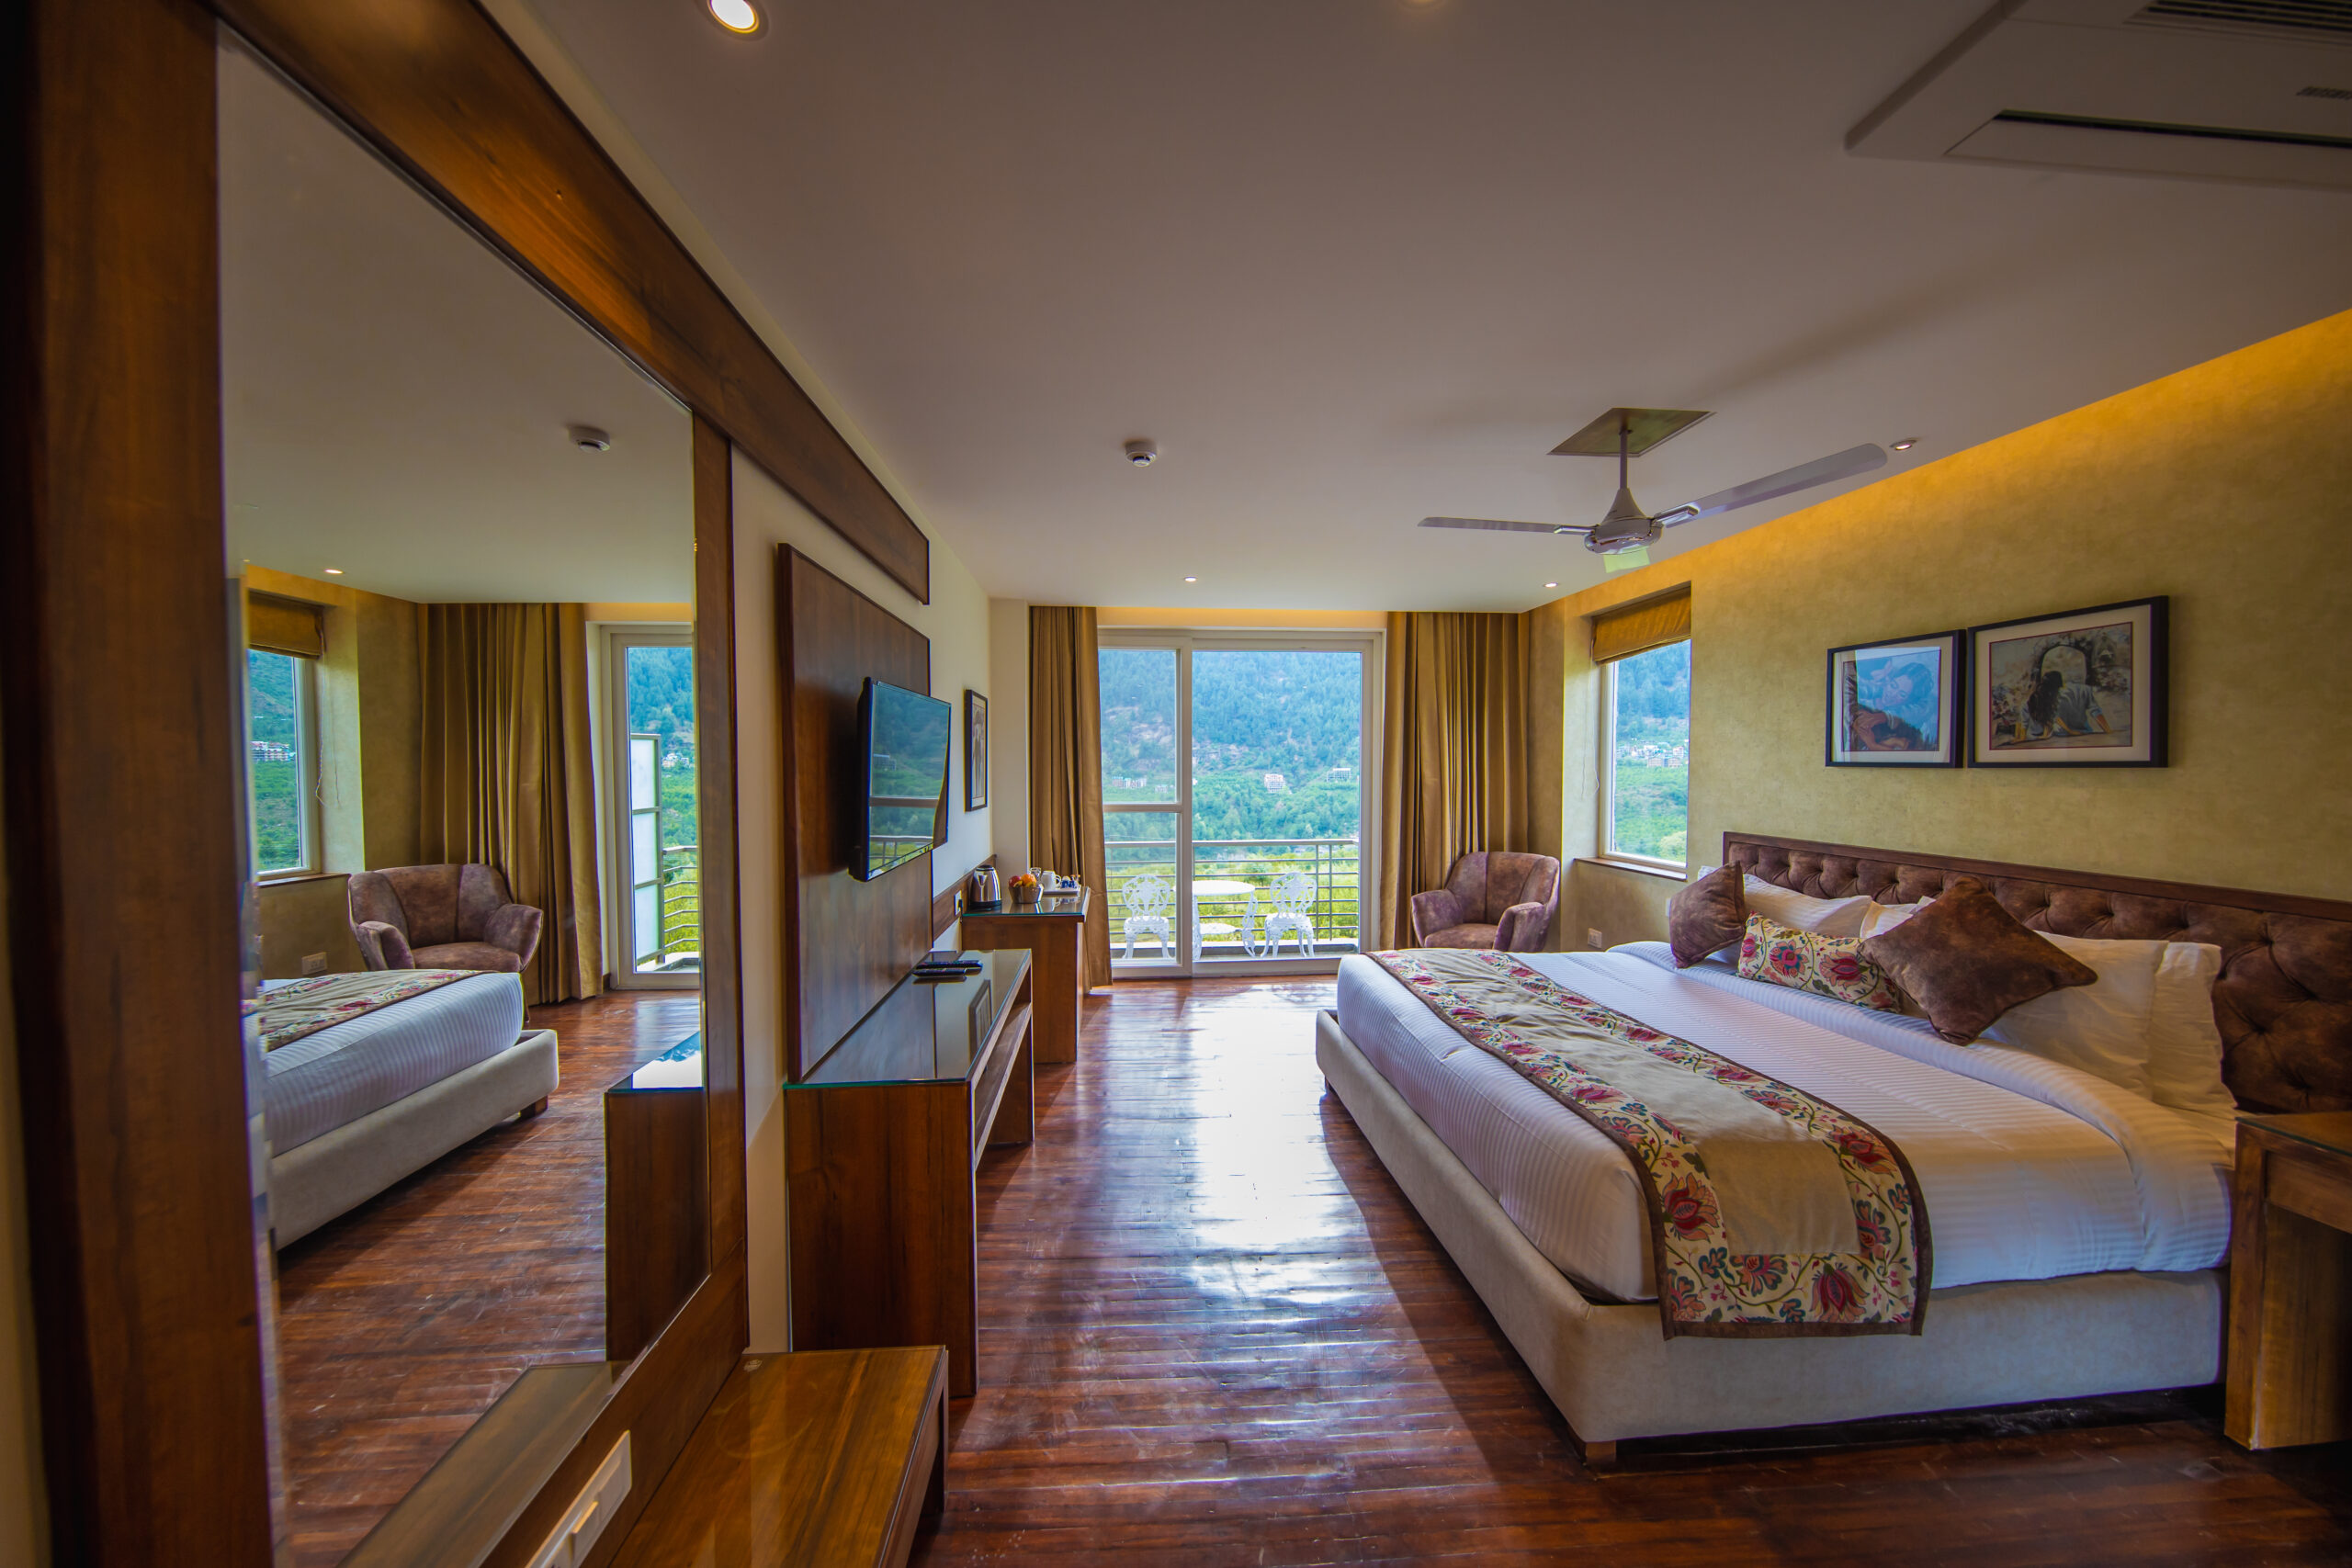 JüSTa Hotels & Resorts to open its first property in Manali on December 1